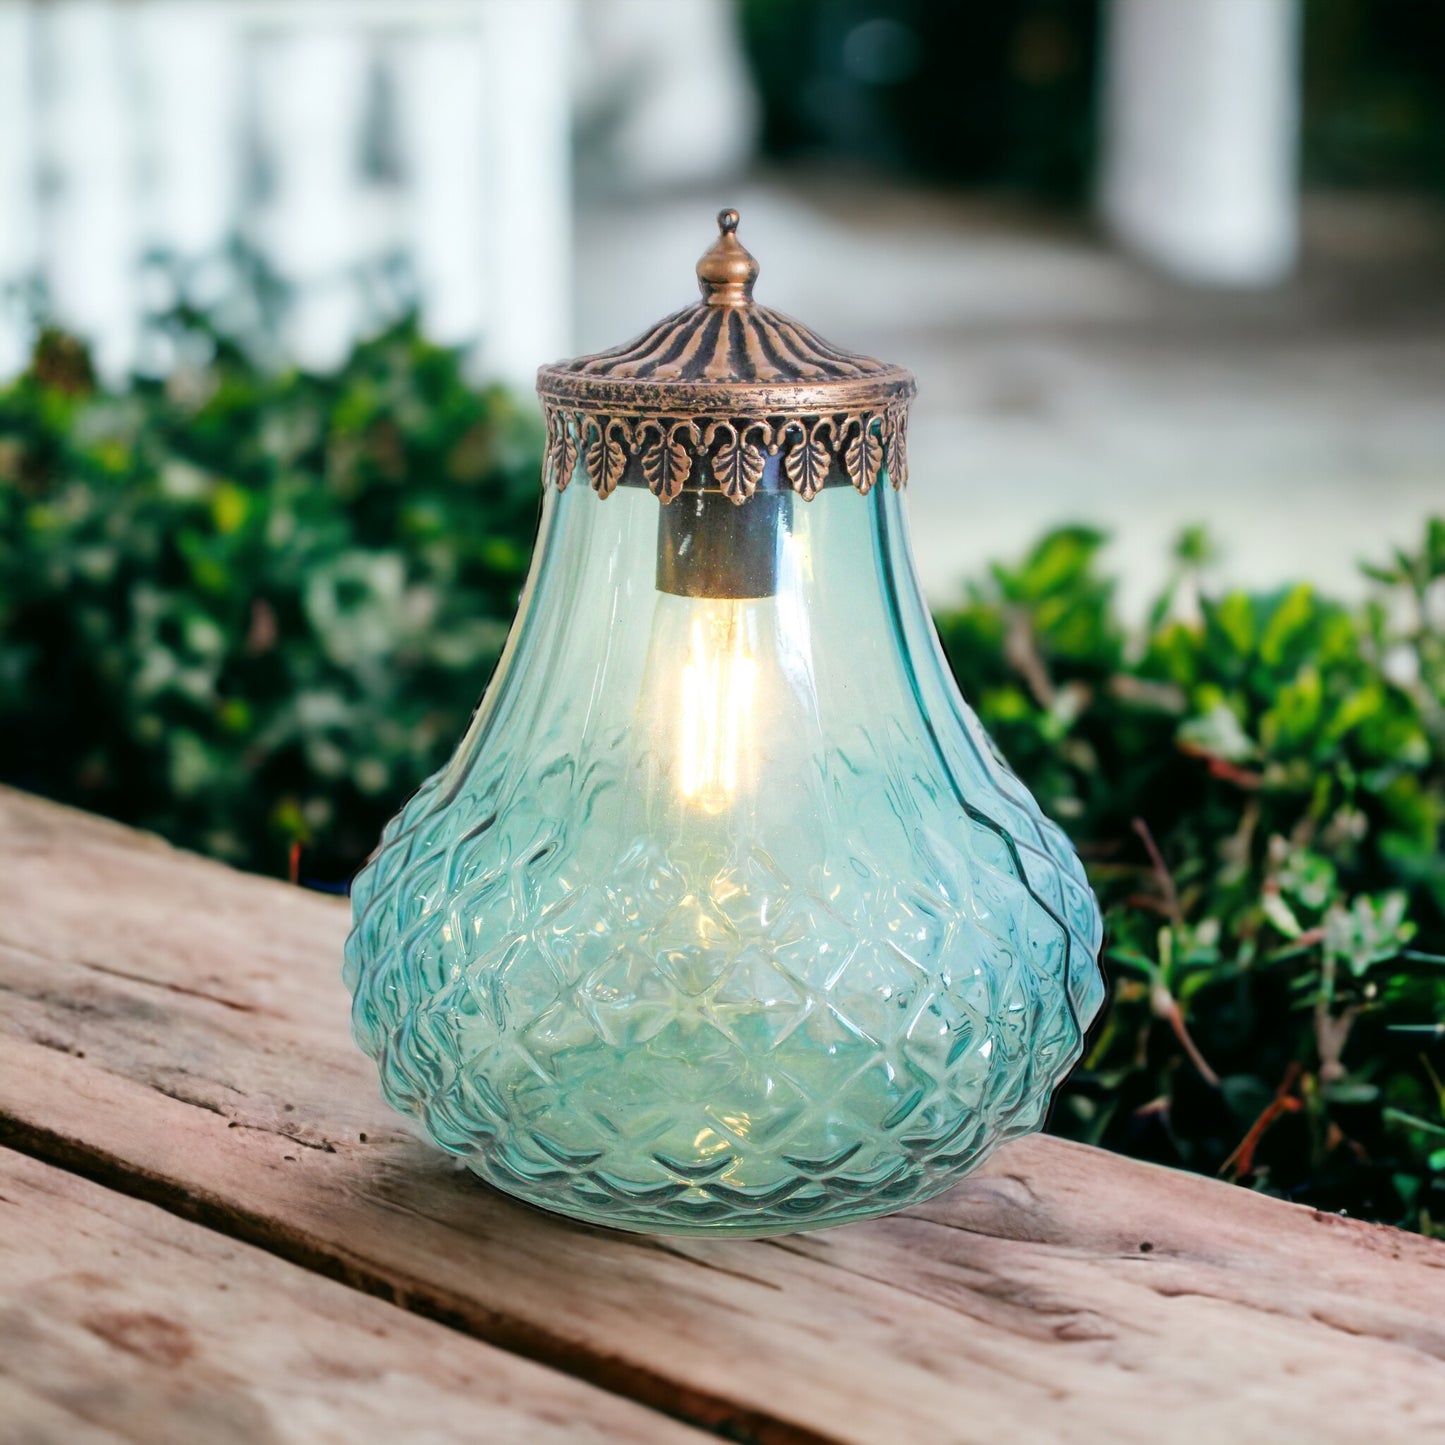 Lantern Light LED Rustic Shimmer - The Renmy Store Homewares & Gifts 